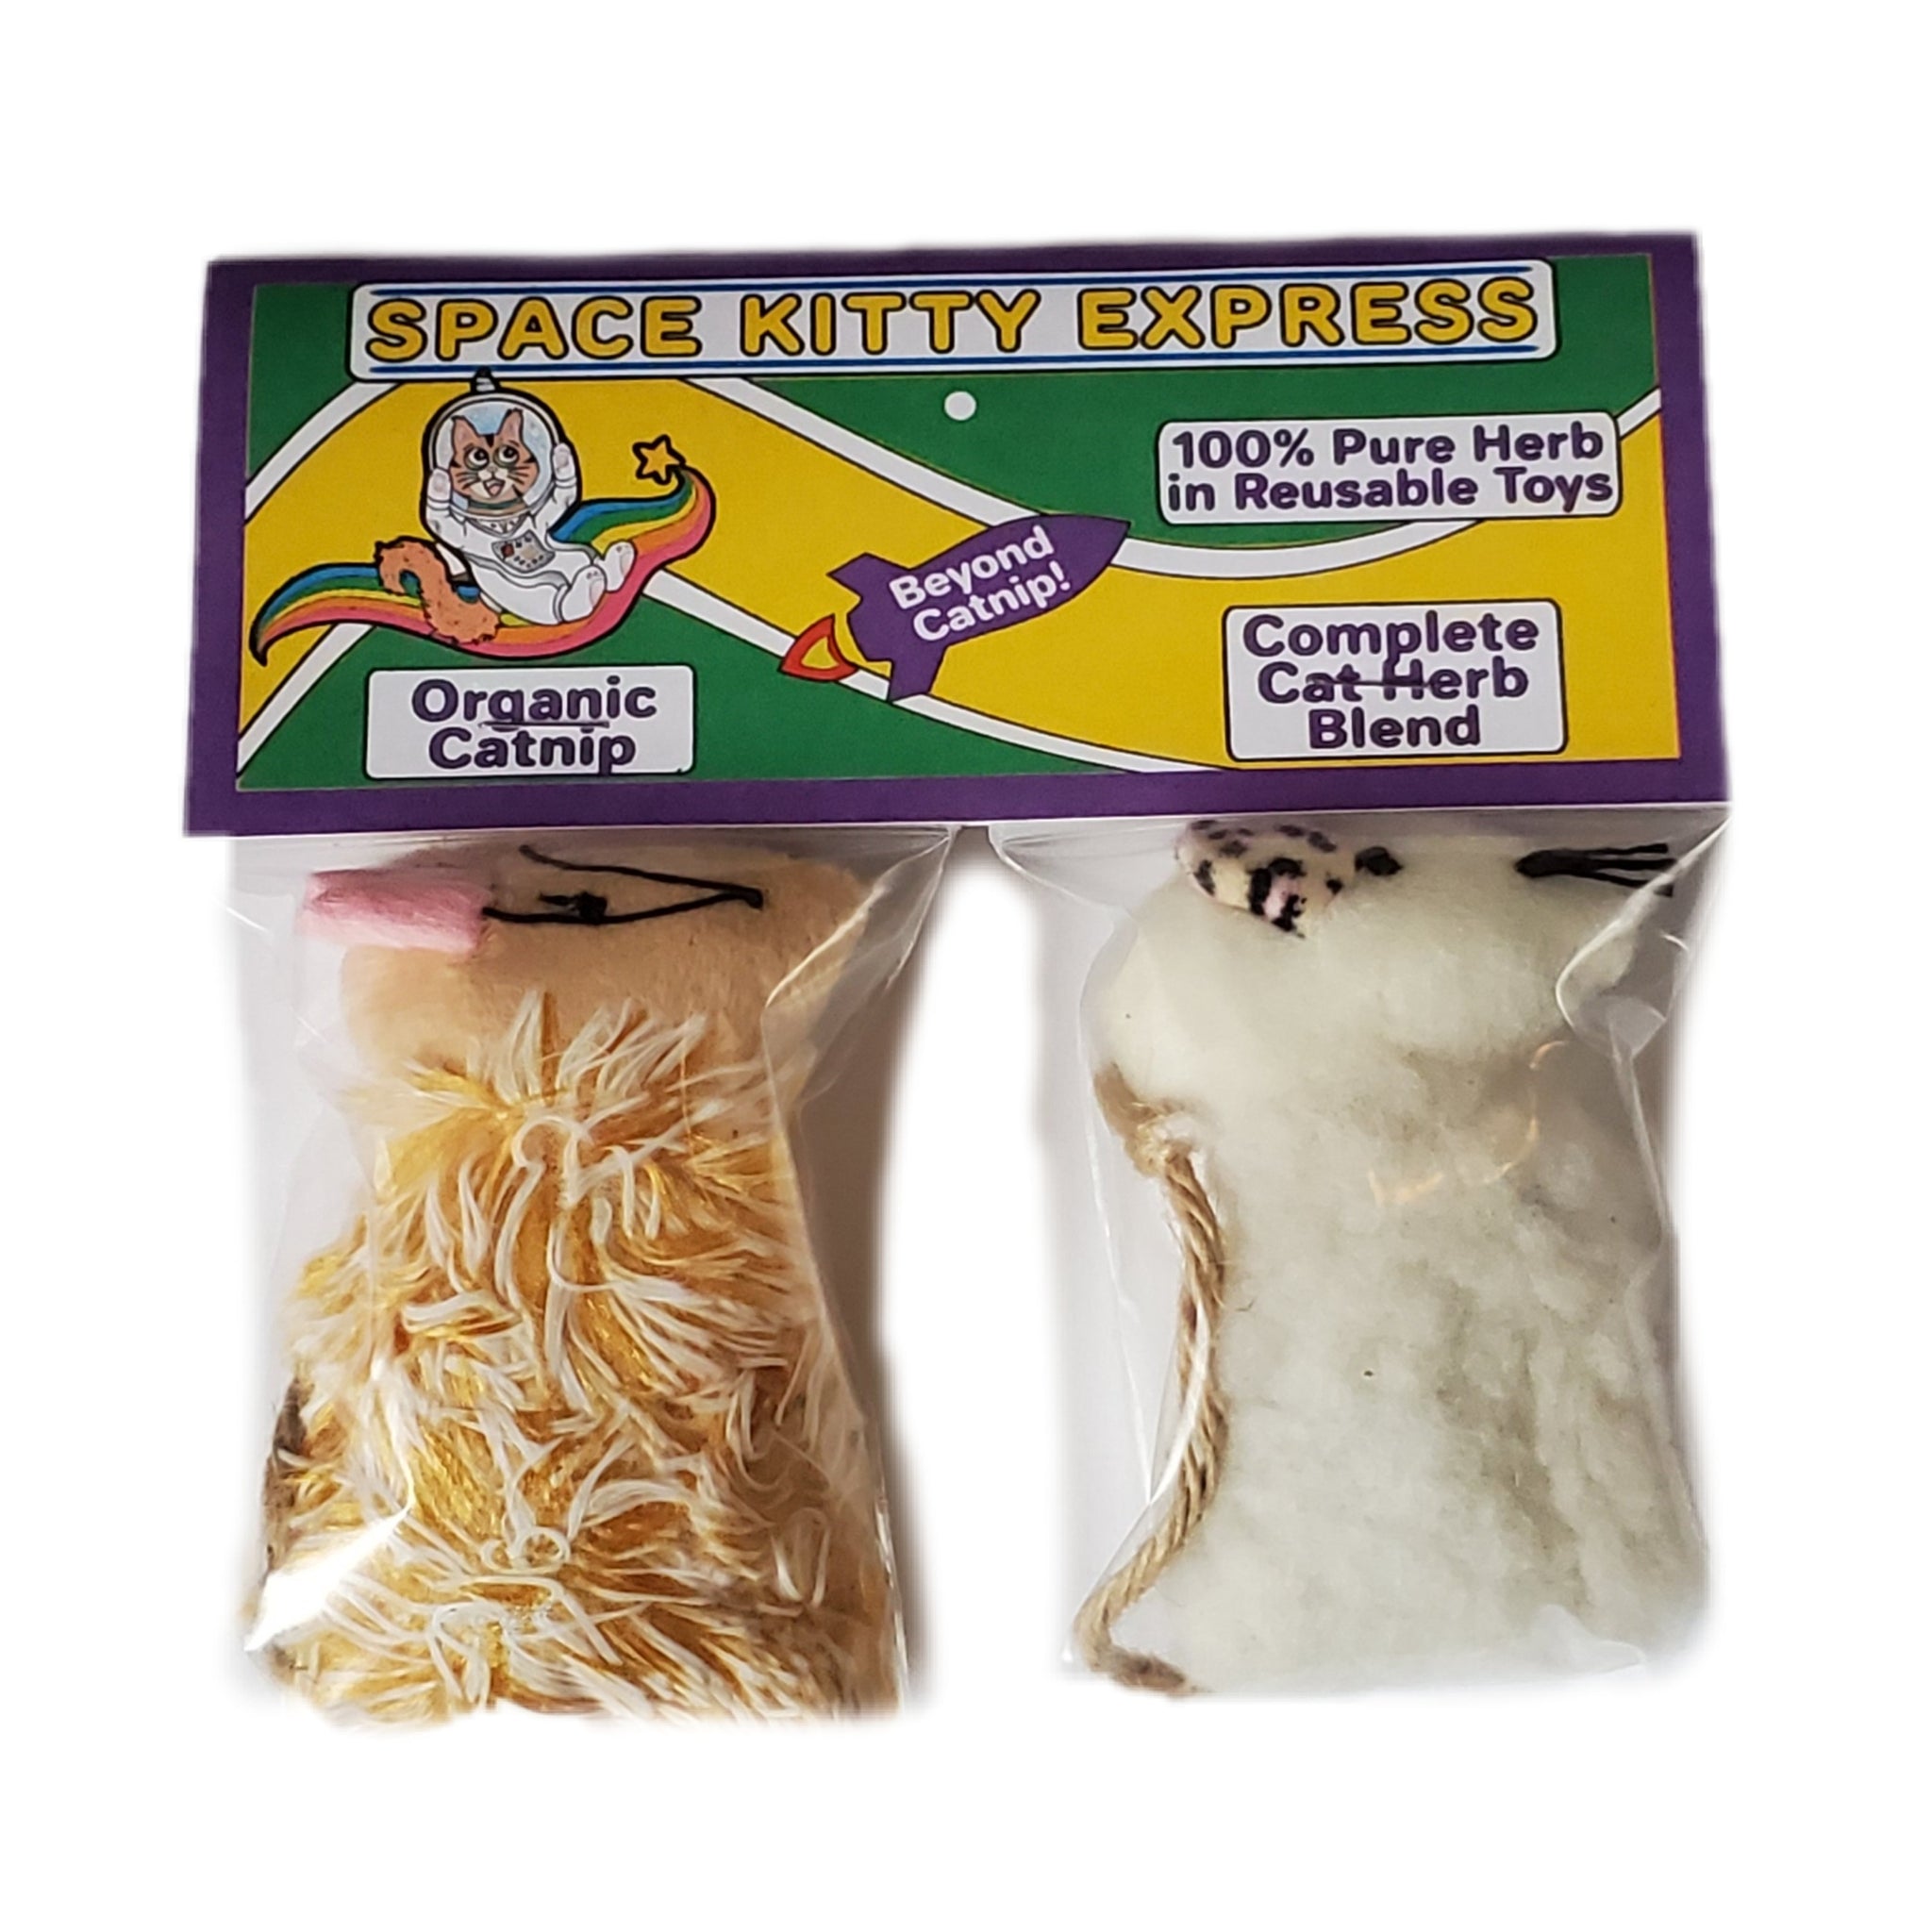 Space Kitty Express 2 cat toys: one with Organic Catnip and the other with Complete Cat Herb Blend, front of package